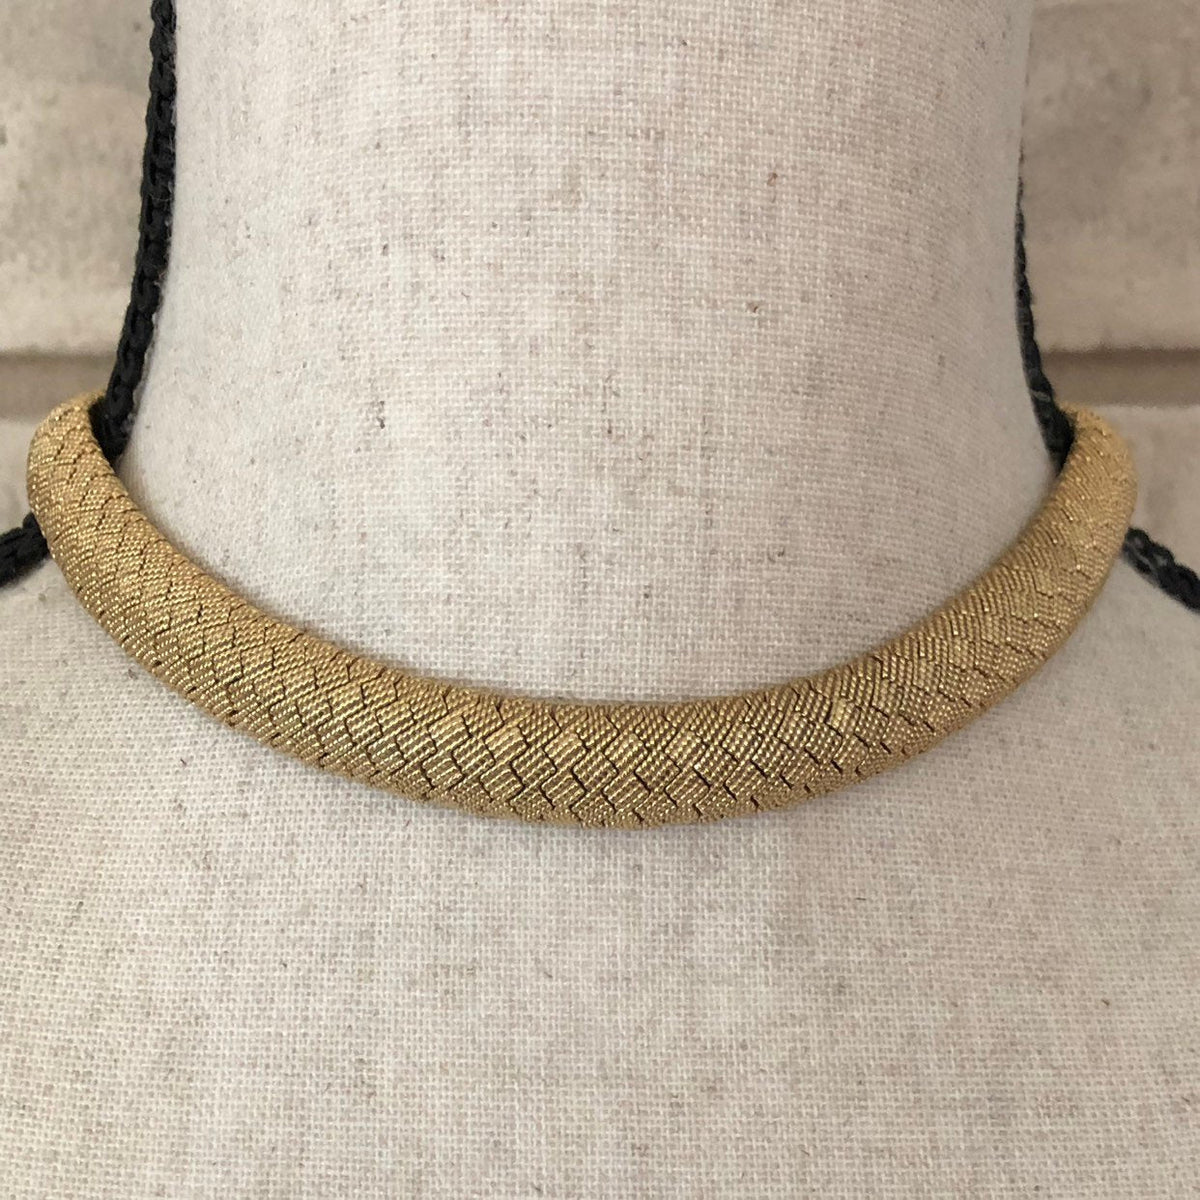 Ciner Gold Snake Chain Necklace - 24 Wishes Vintage Jewelry